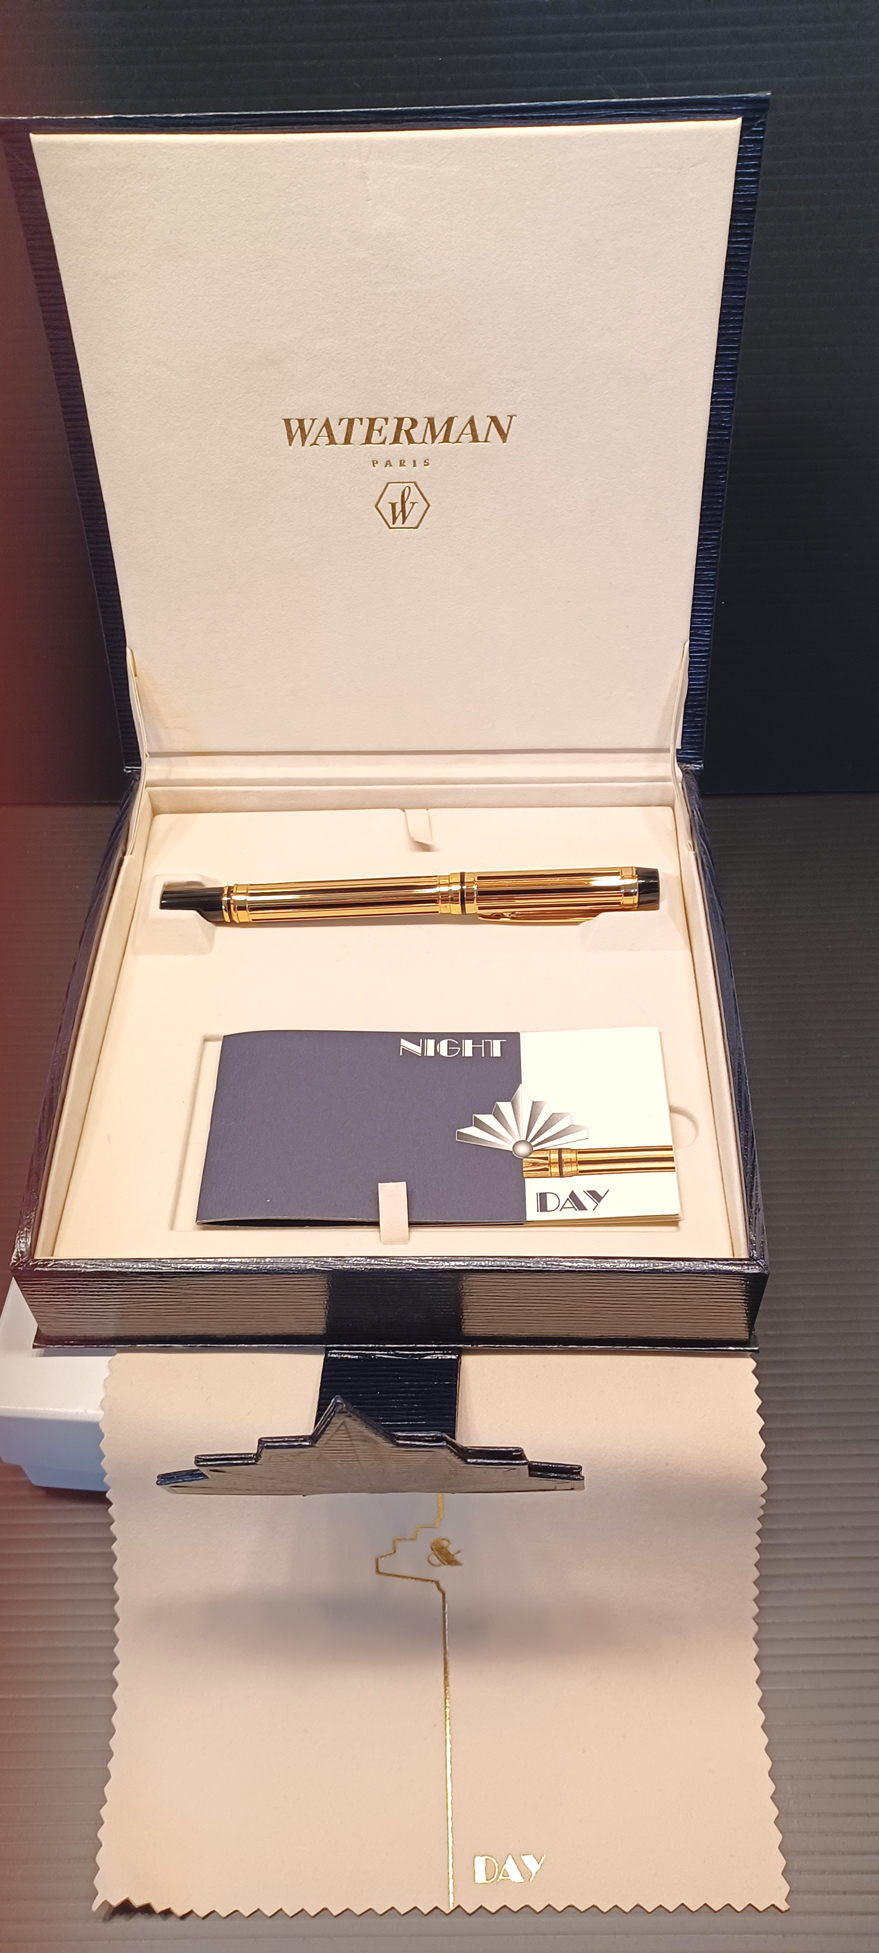 18CT PLATED WATERMAN 'NIGHT AND DAY' FOUNTAIN PEN SET COMPLETE UN-USED BROUGHT FROM HARRODS IN 2000.